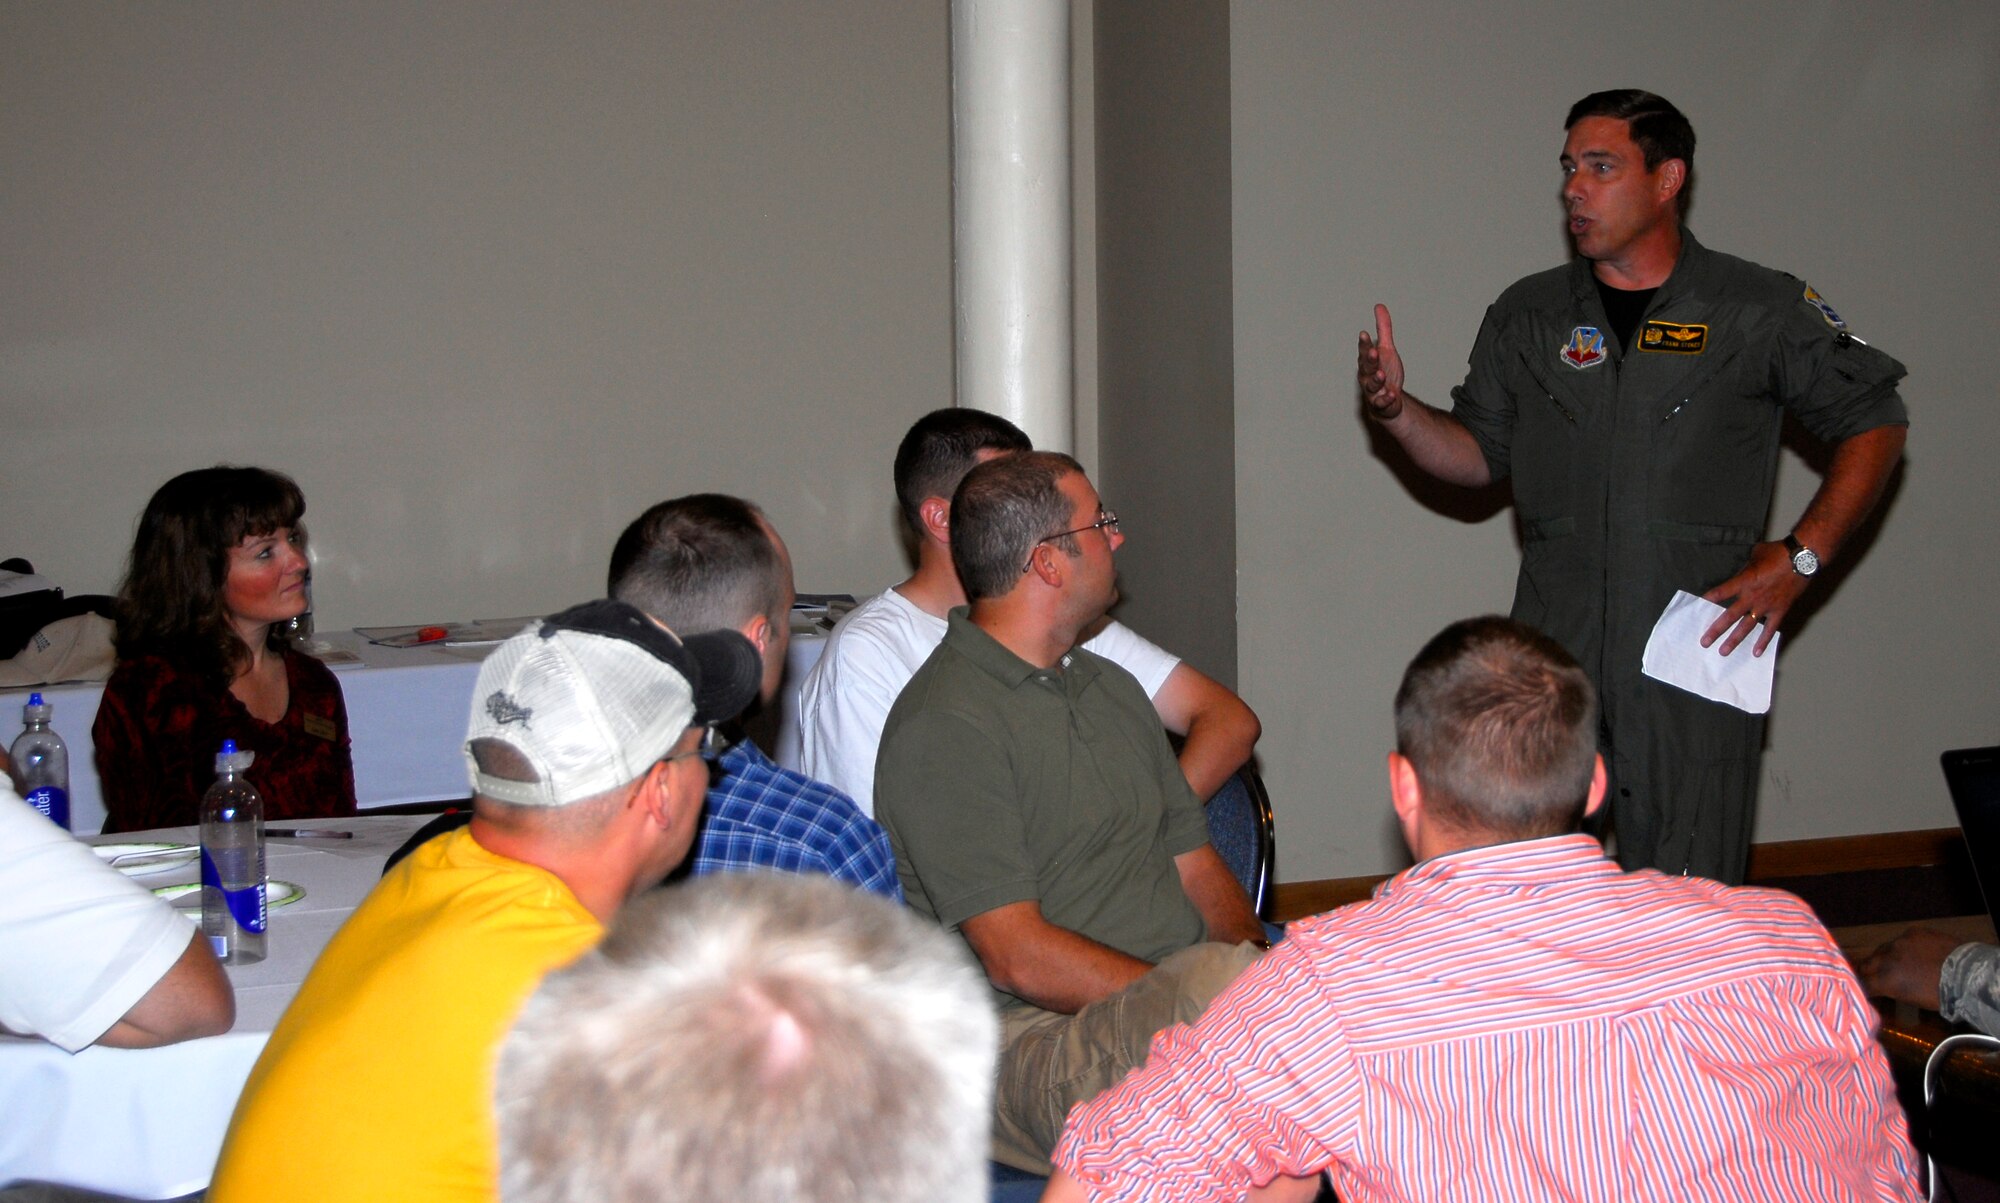 Col. Frank Stokes, Commander of the 148th Fighter Wing, speaks to members of the 148th Fighter Wing Security Forces Squadron during a 60-day Yellow Ribbon Reintegration Program event on Aug. 8, 2010 in Duluth, Minn.